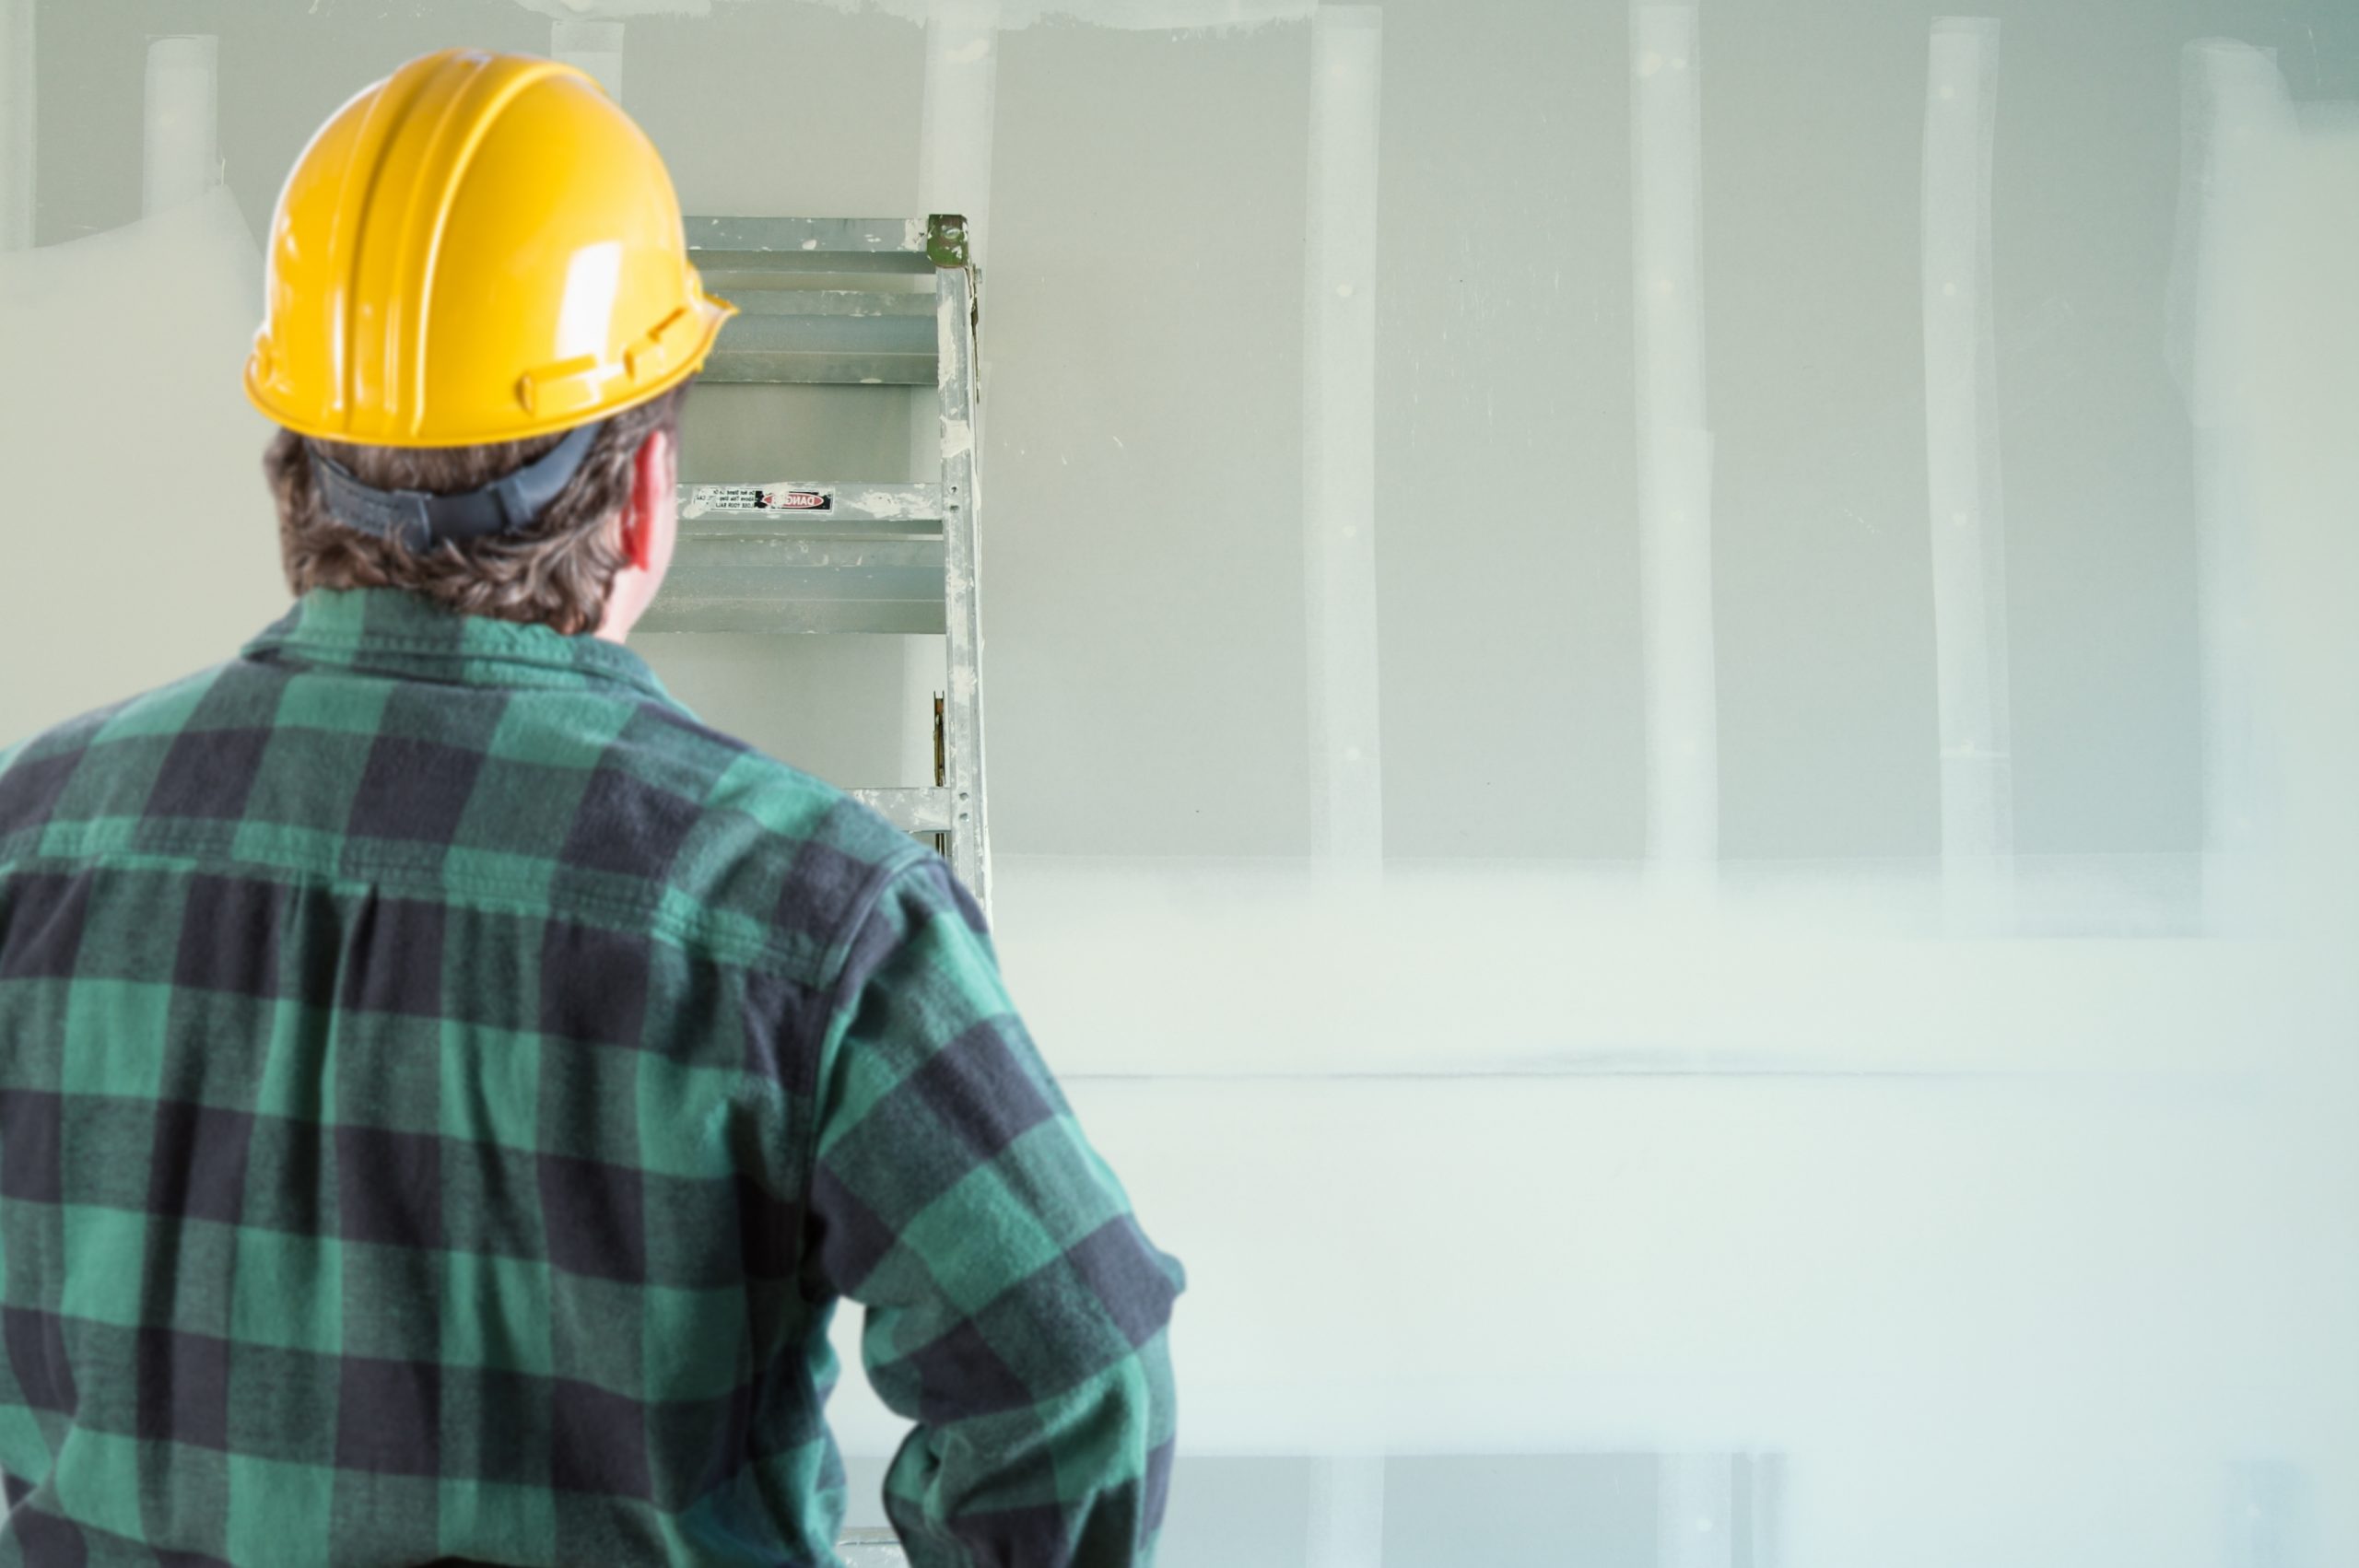 construction worker wearing a black and green plaid shirt and a yellow hard hat looking at interior building